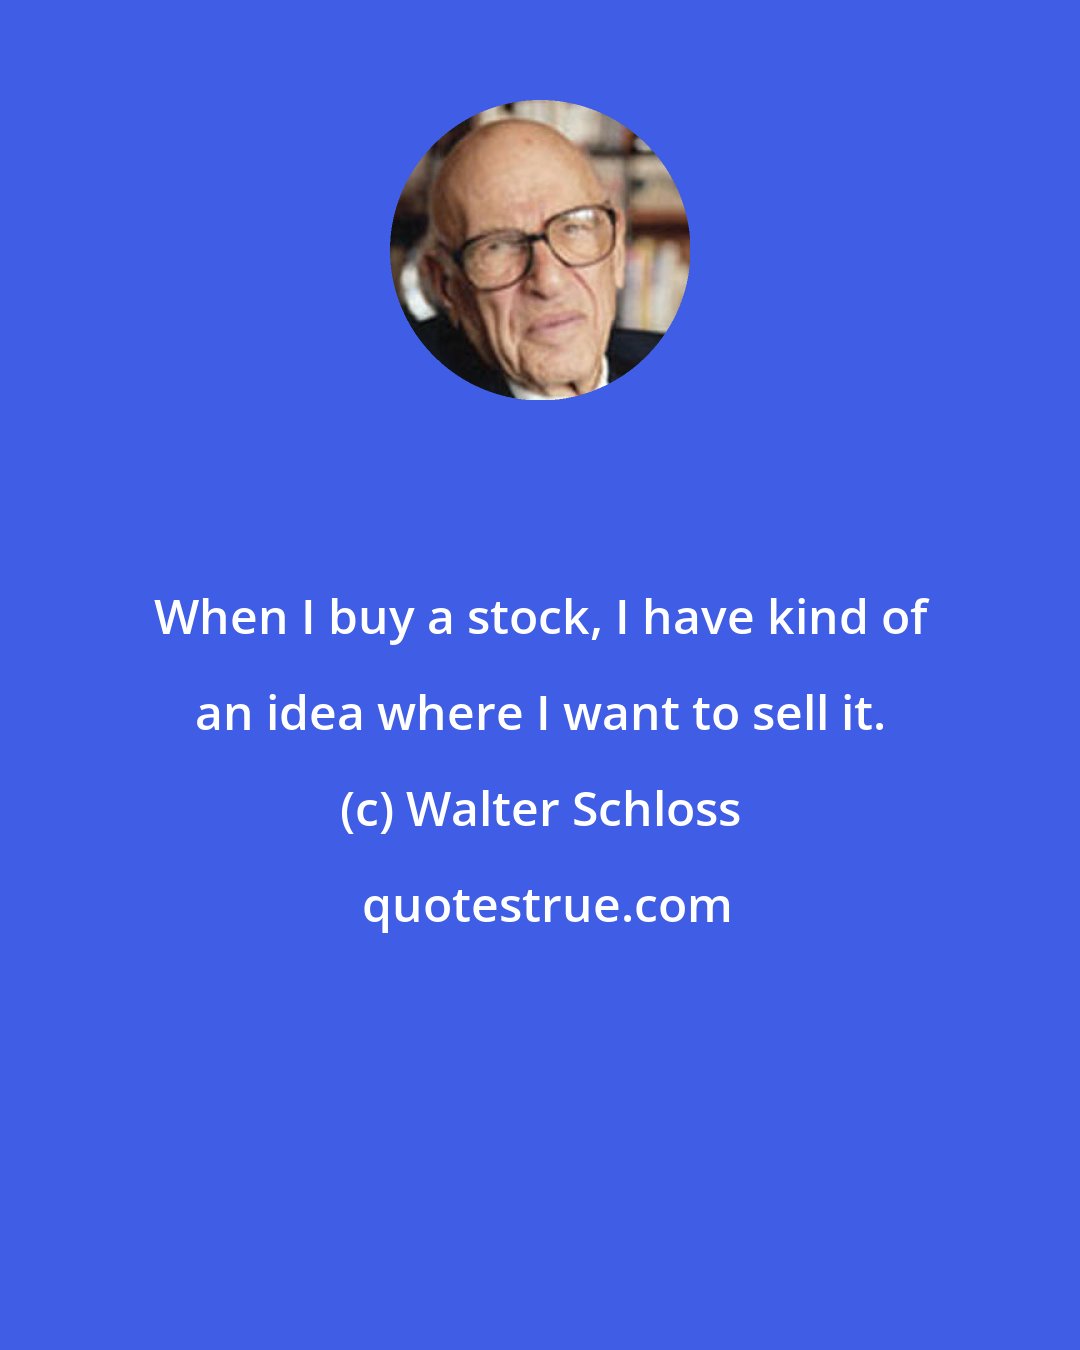 Walter Schloss: When I buy a stock, I have kind of an idea where I want to sell it.